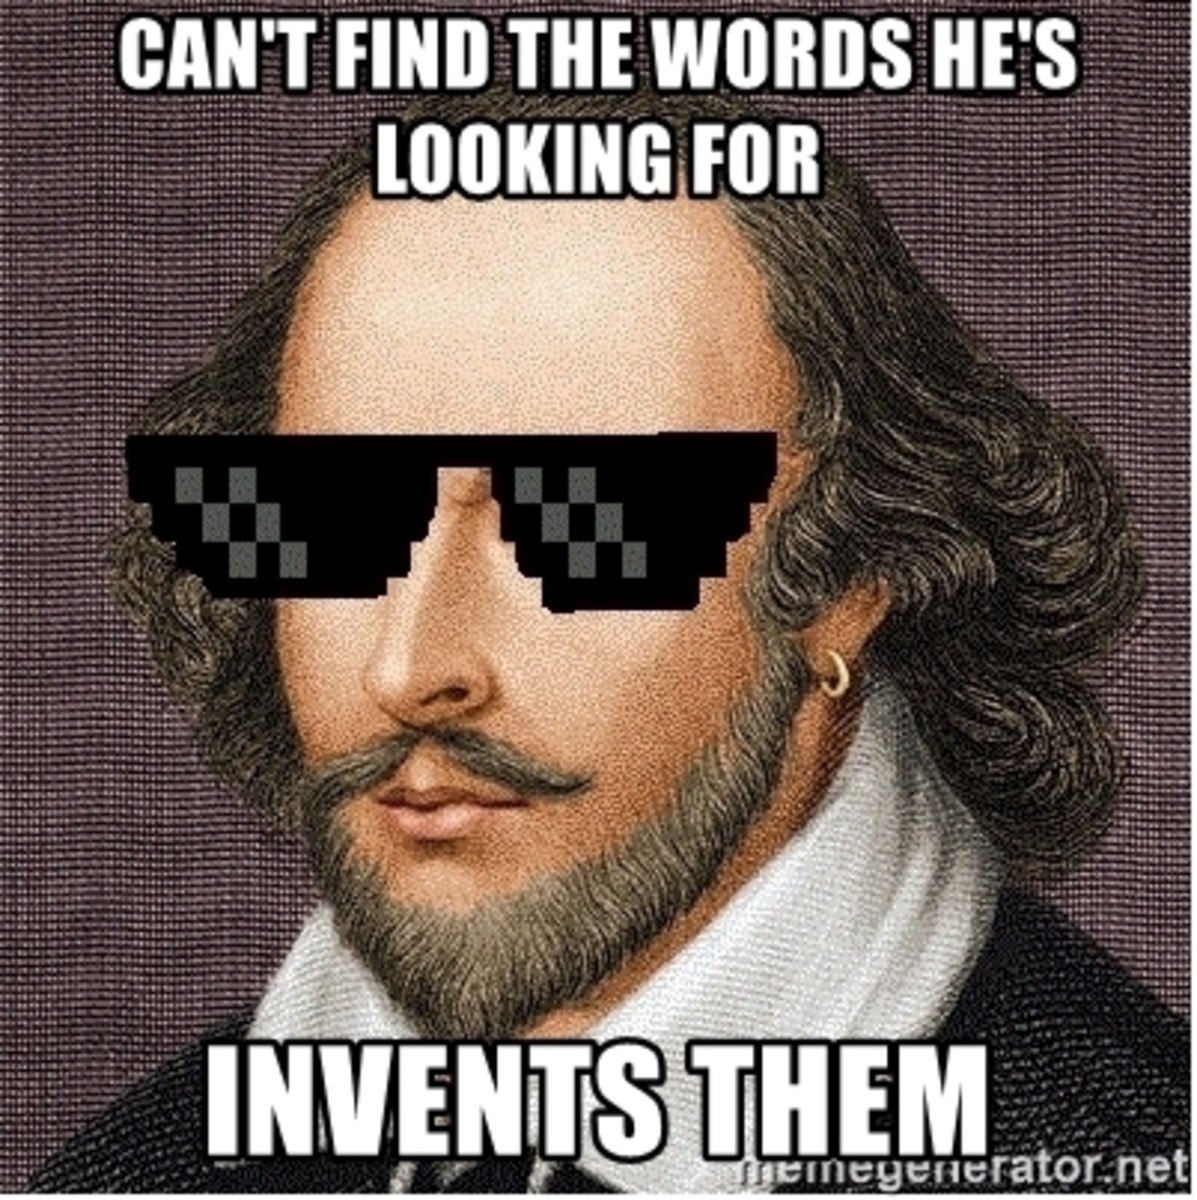 This just shows how Shakespeare went about